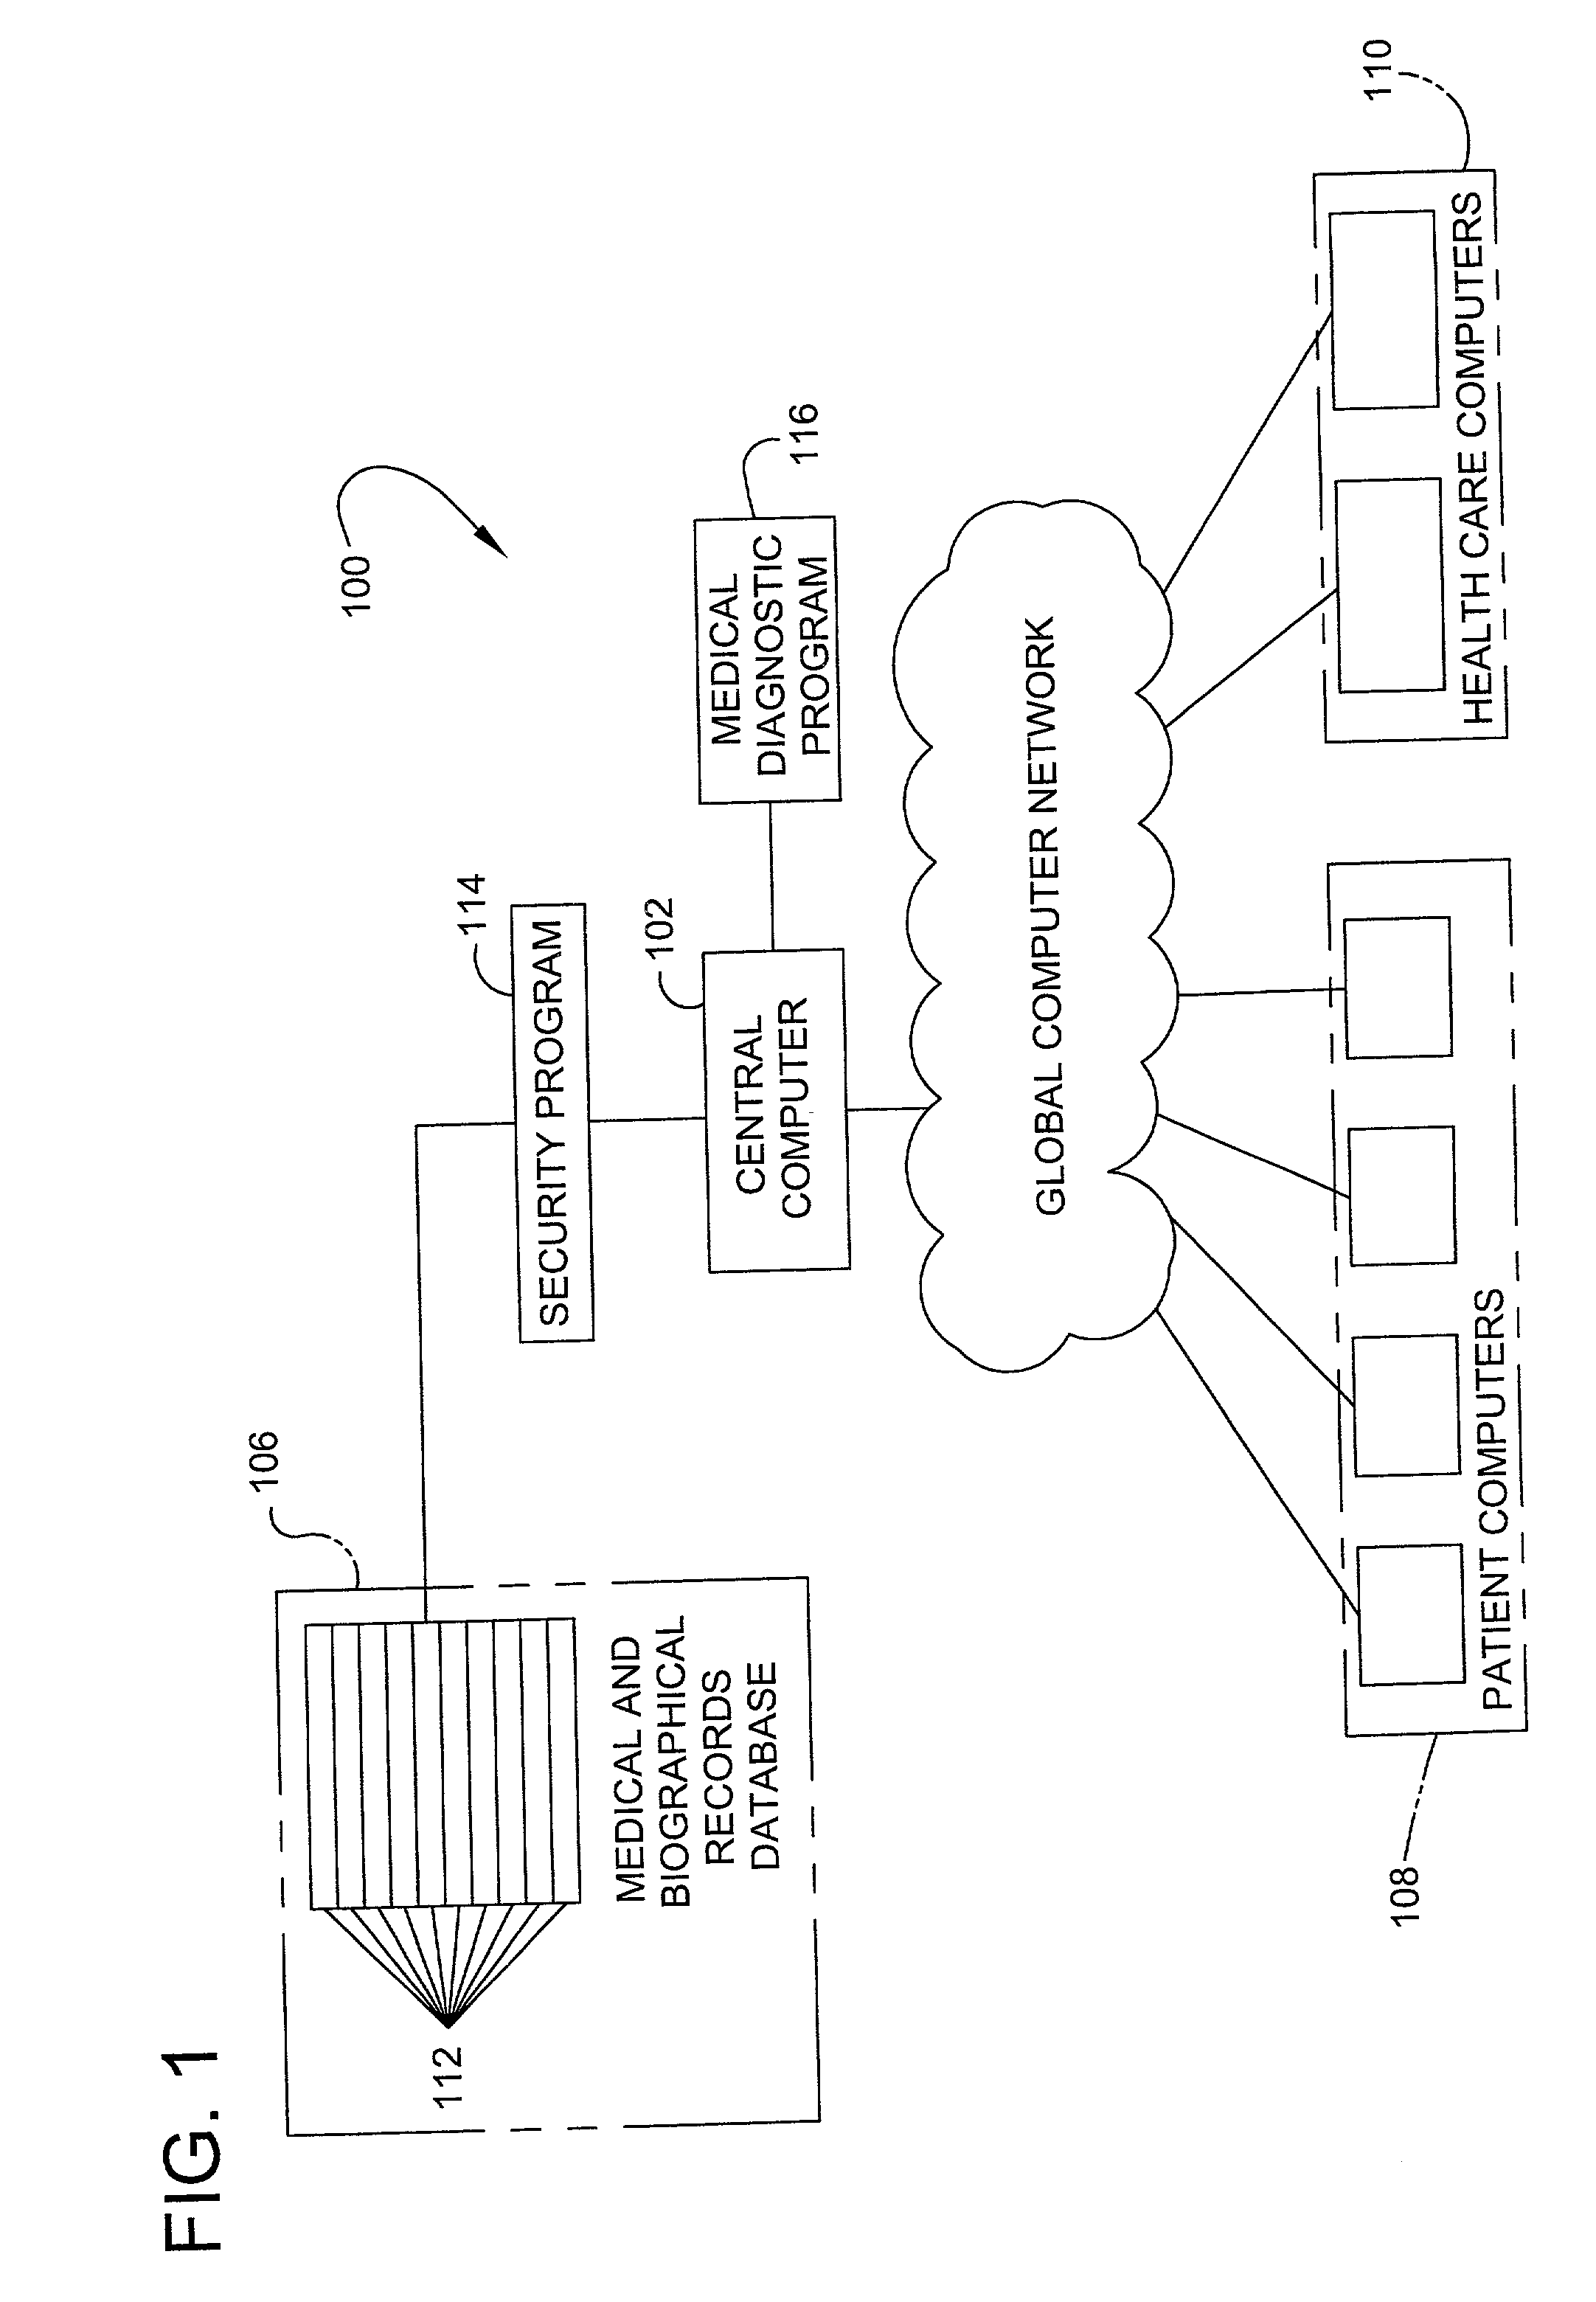 Patient - controlled automated medical record, diagnosis, and treatment system and method